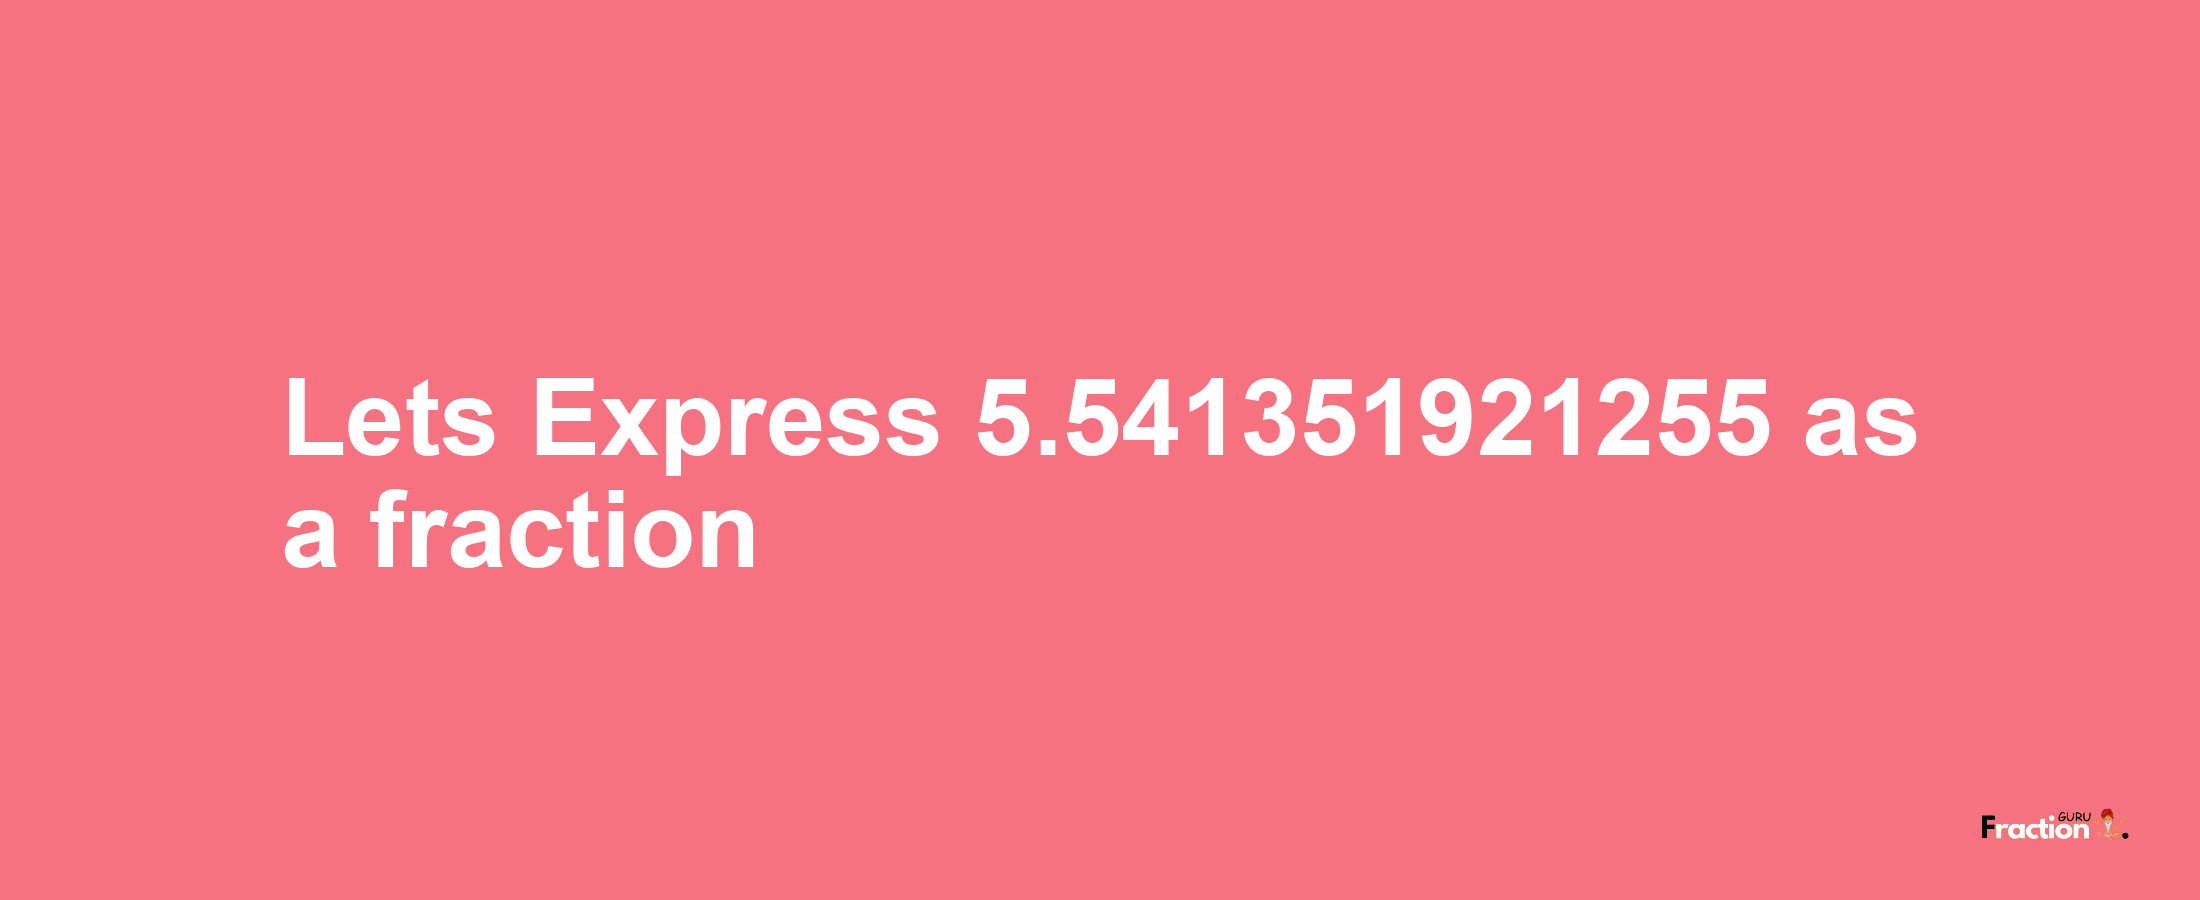 Lets Express 5.541351921255 as afraction